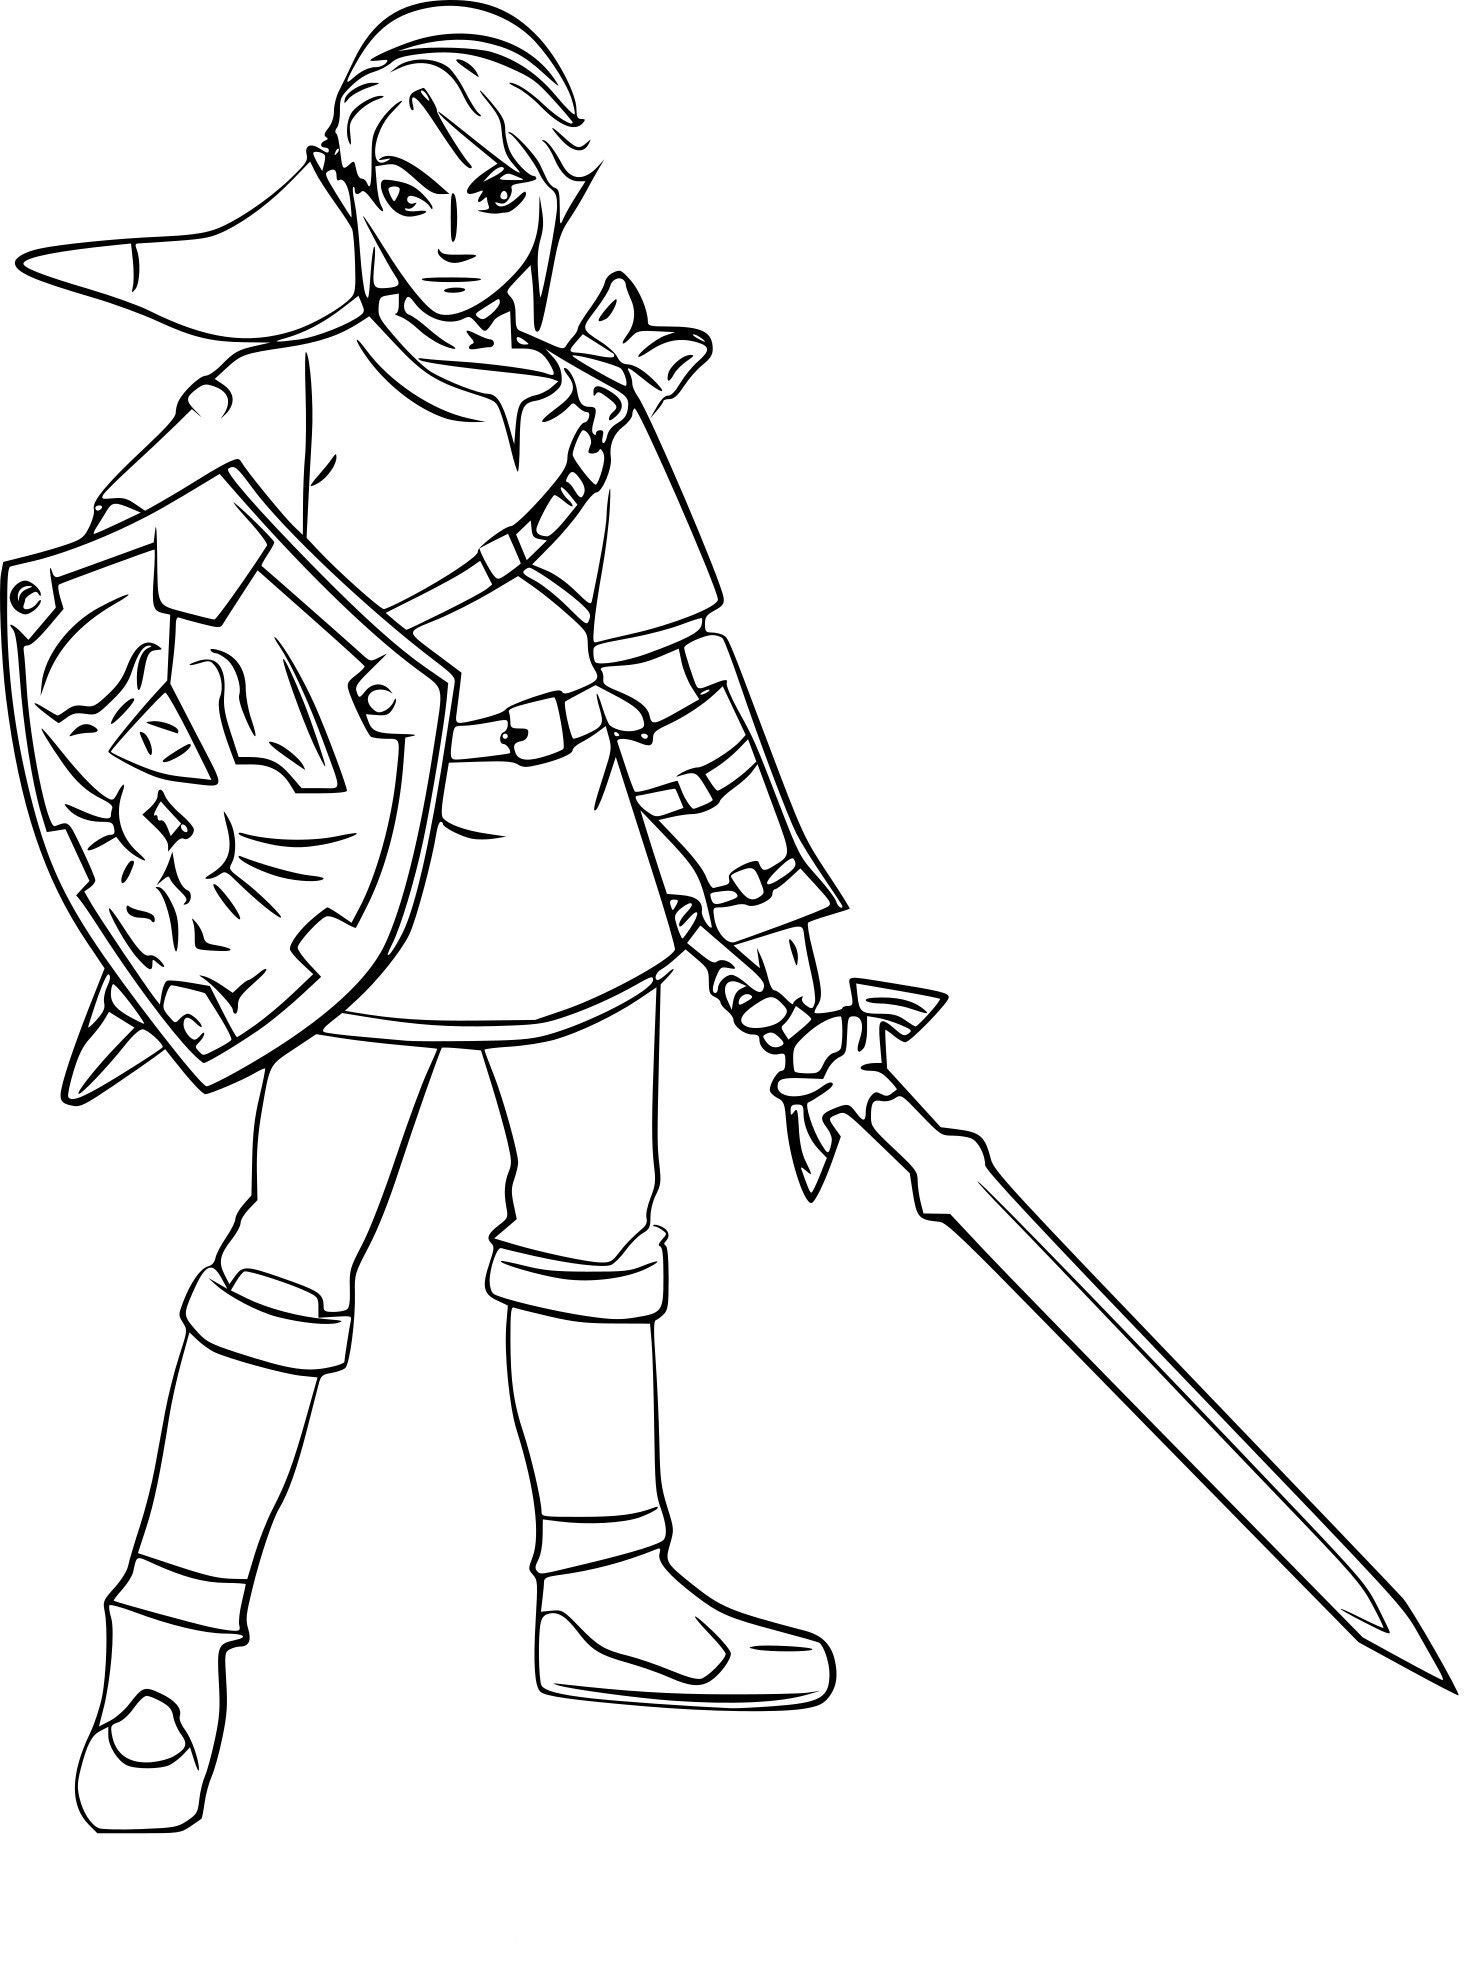 Cool zelda coloring pages pdf free